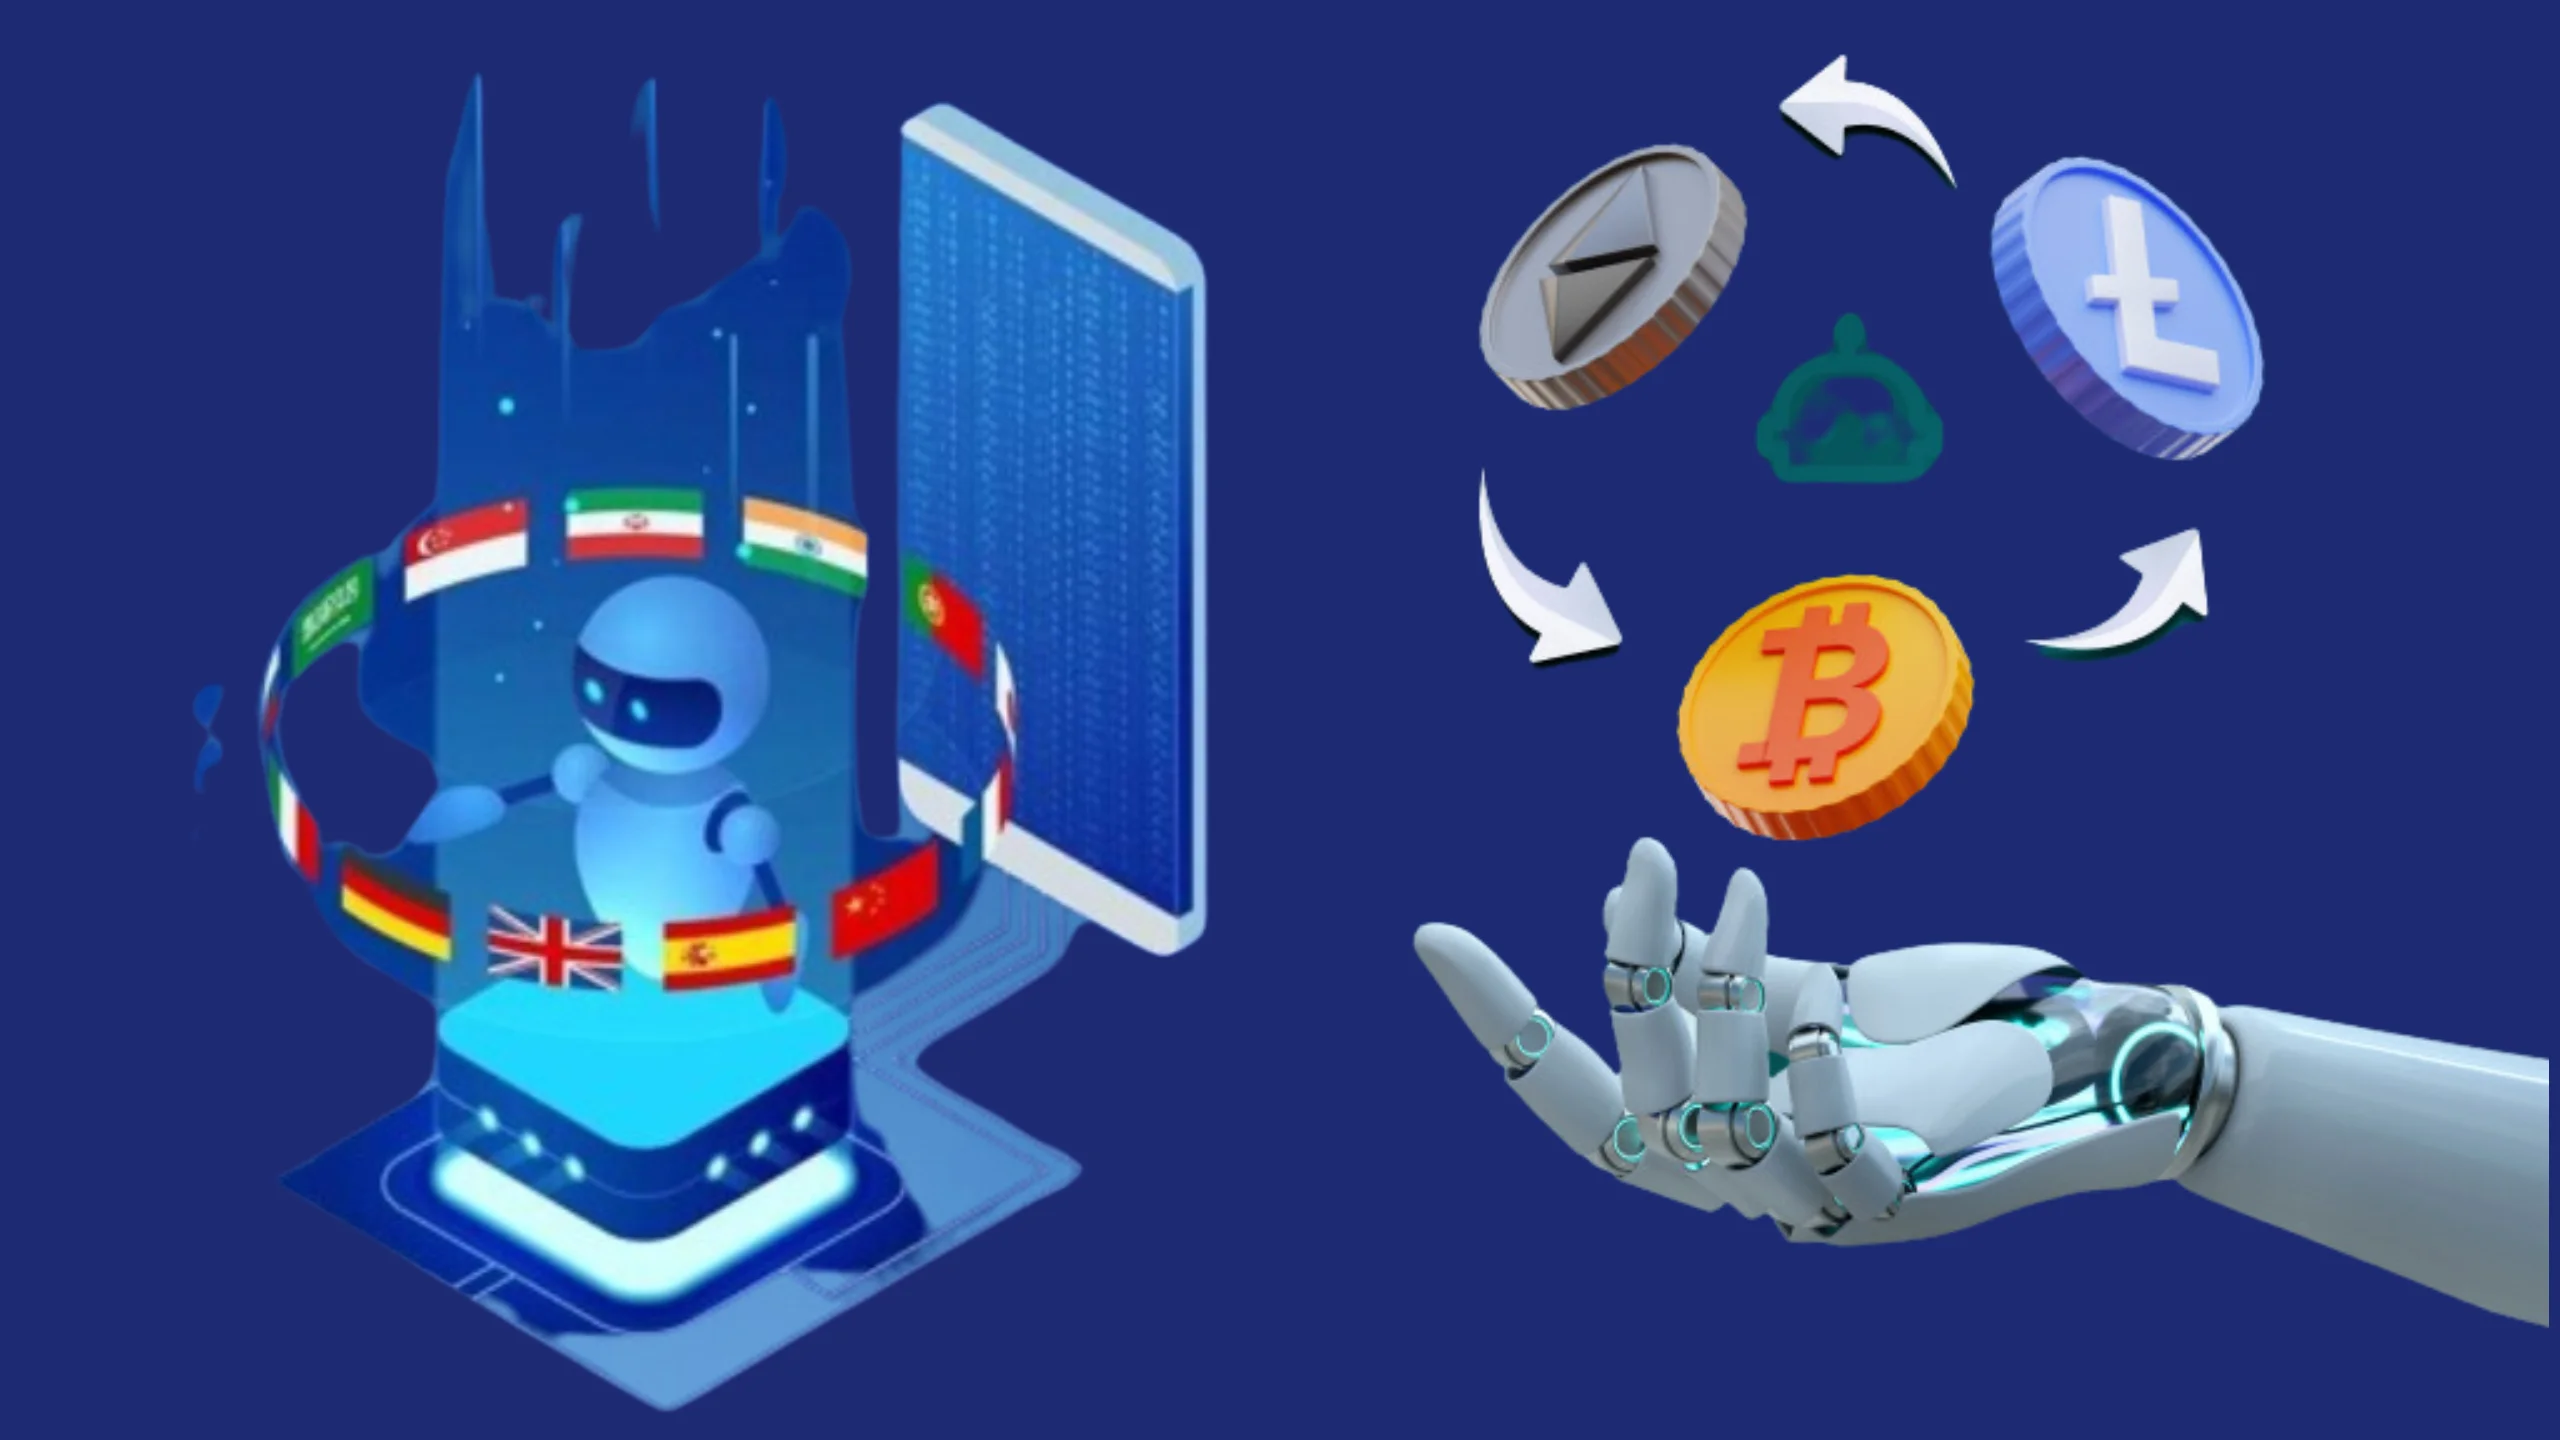 Enhance your trading strategy with the advanced features of Cross Exchange Crypto Arbitrage Bots.